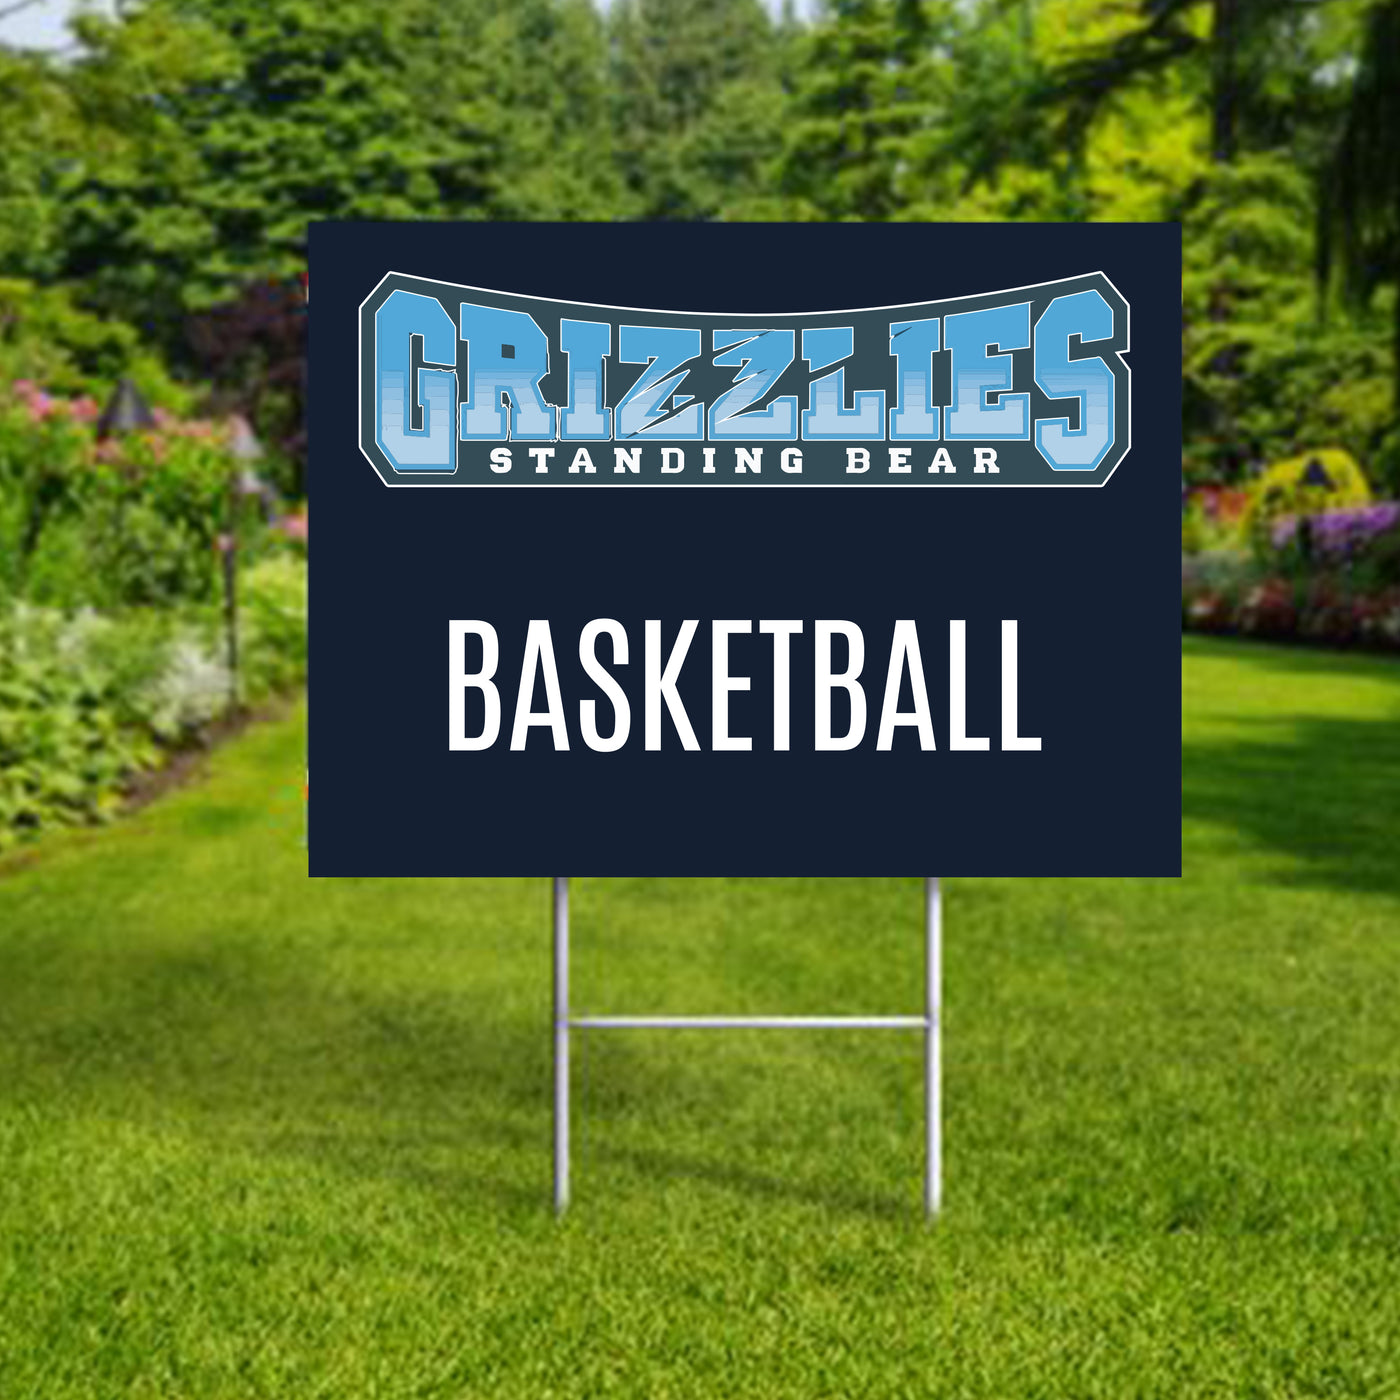 Personalized yard sign for Standing Bear Grizzlies sports team player. The sign features the team logo in the center, surrounded by a background in team colors.